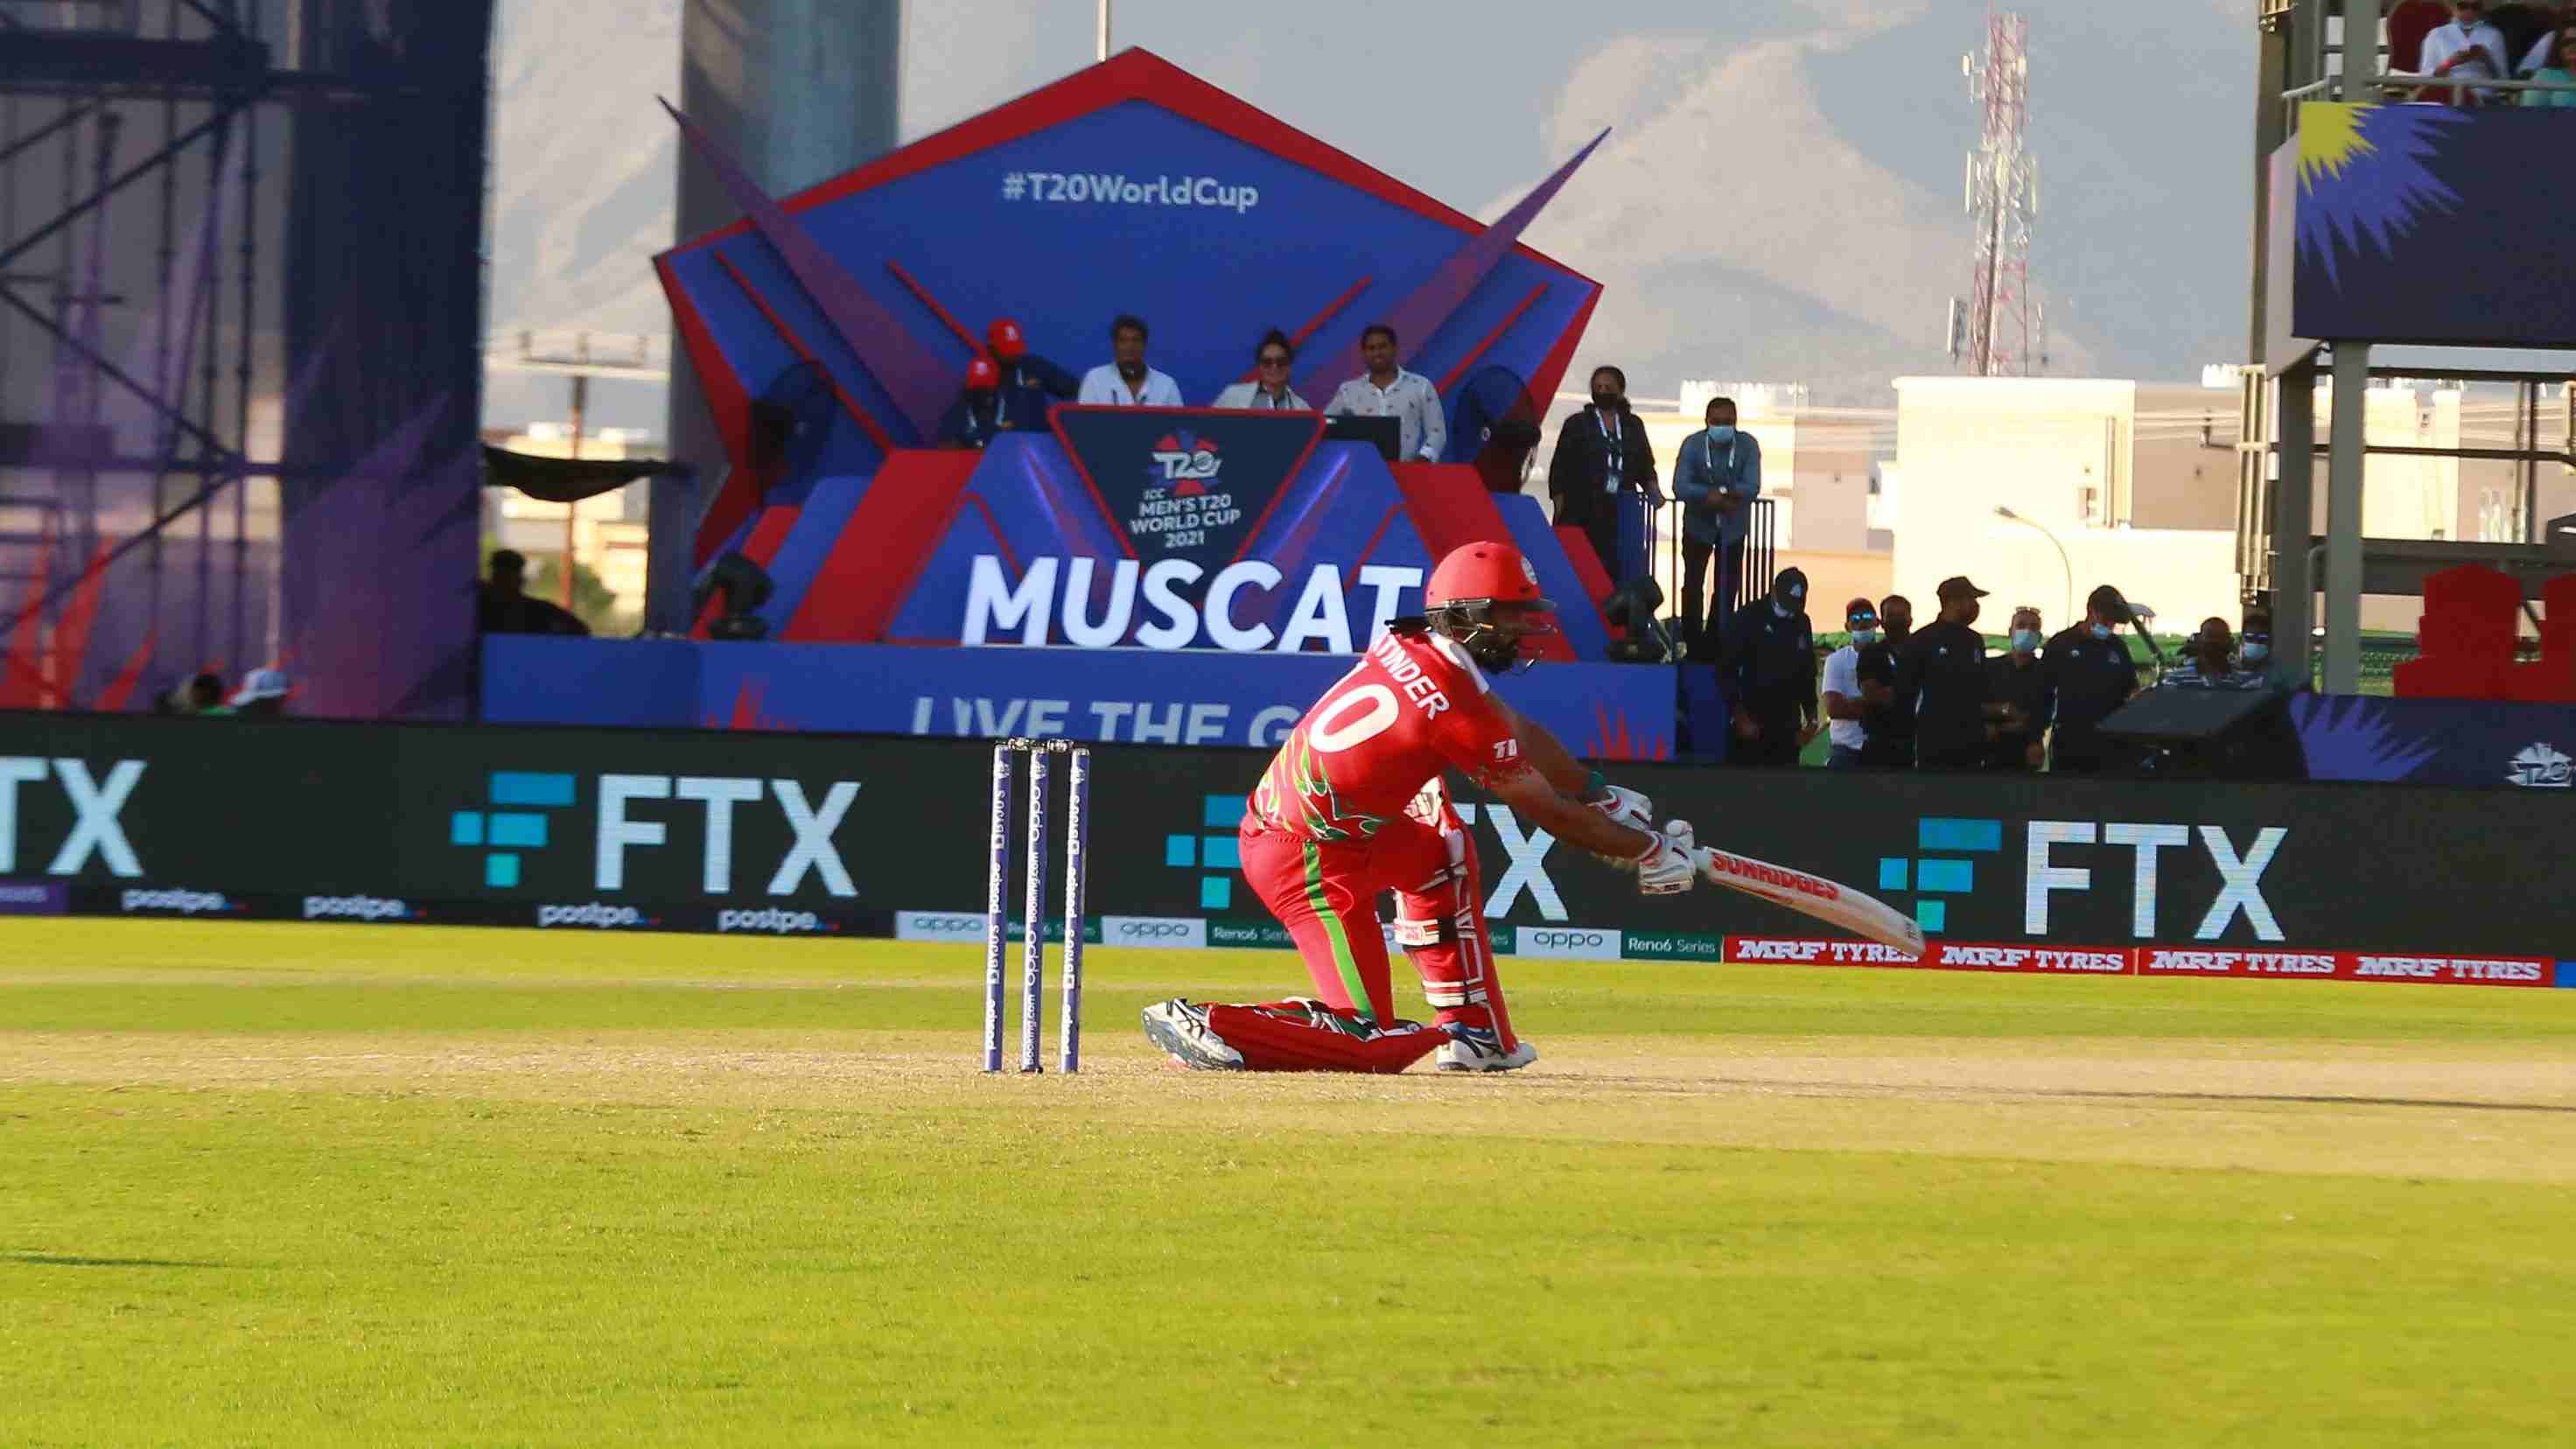 World T20 2021: After contrasting starts, Oman need to stick to basics, Bangladesh have questions to answer 